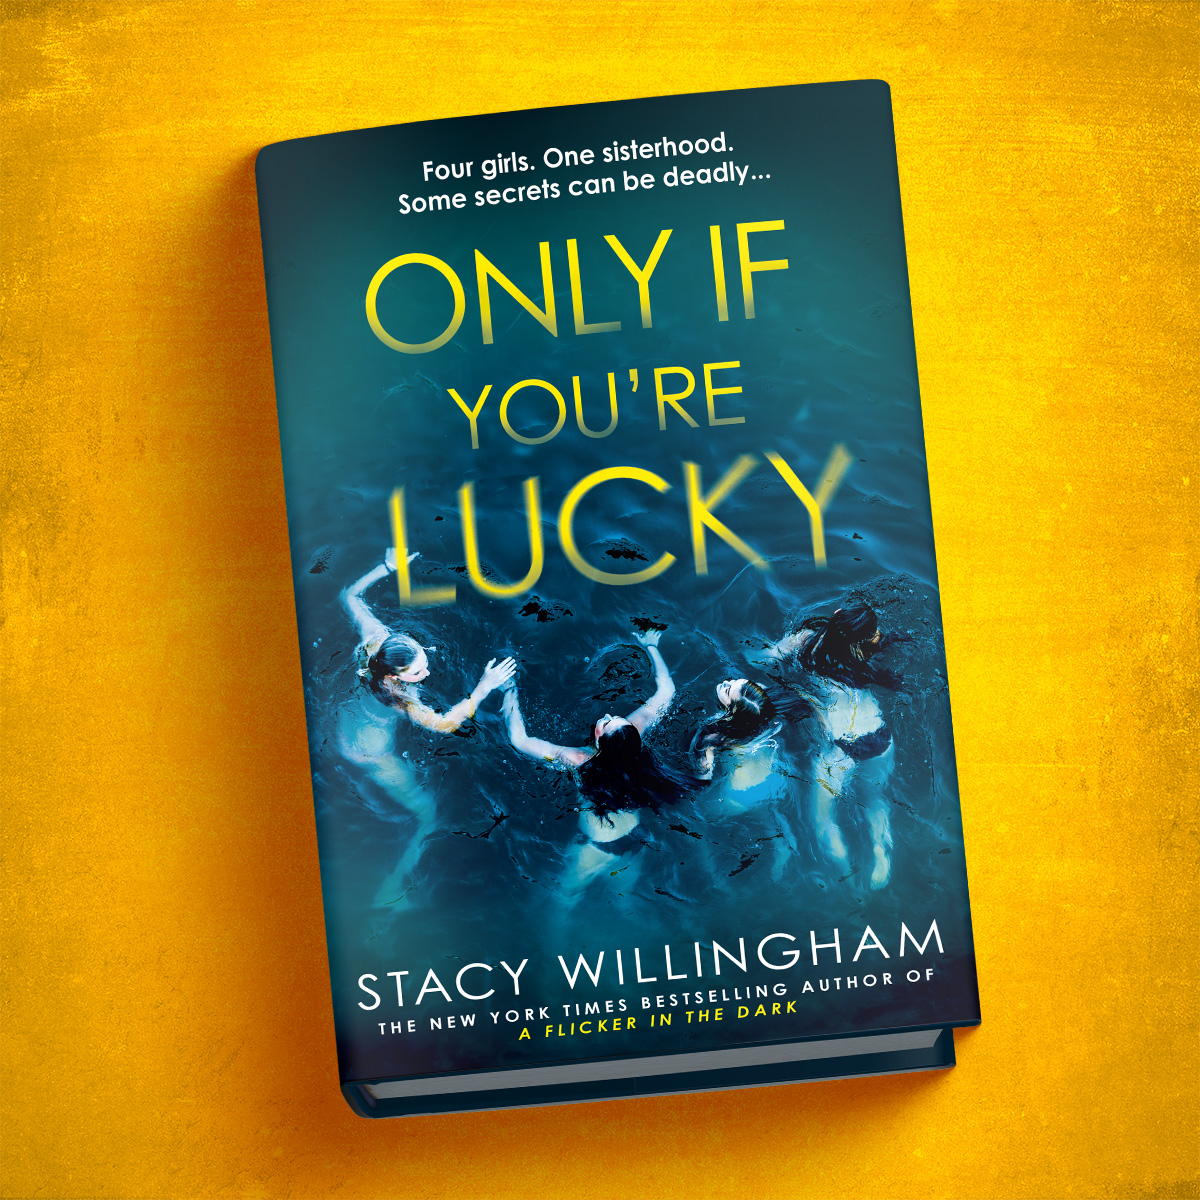 The New York Times bestselling author of A Flicker in the Dark and All The Dangerous Things, @svwillingham returns with a gripping new psychological thriller about female friendship and dark secrets! Only If You're Lucky is out now 🔗smarturl.it/IACDsl